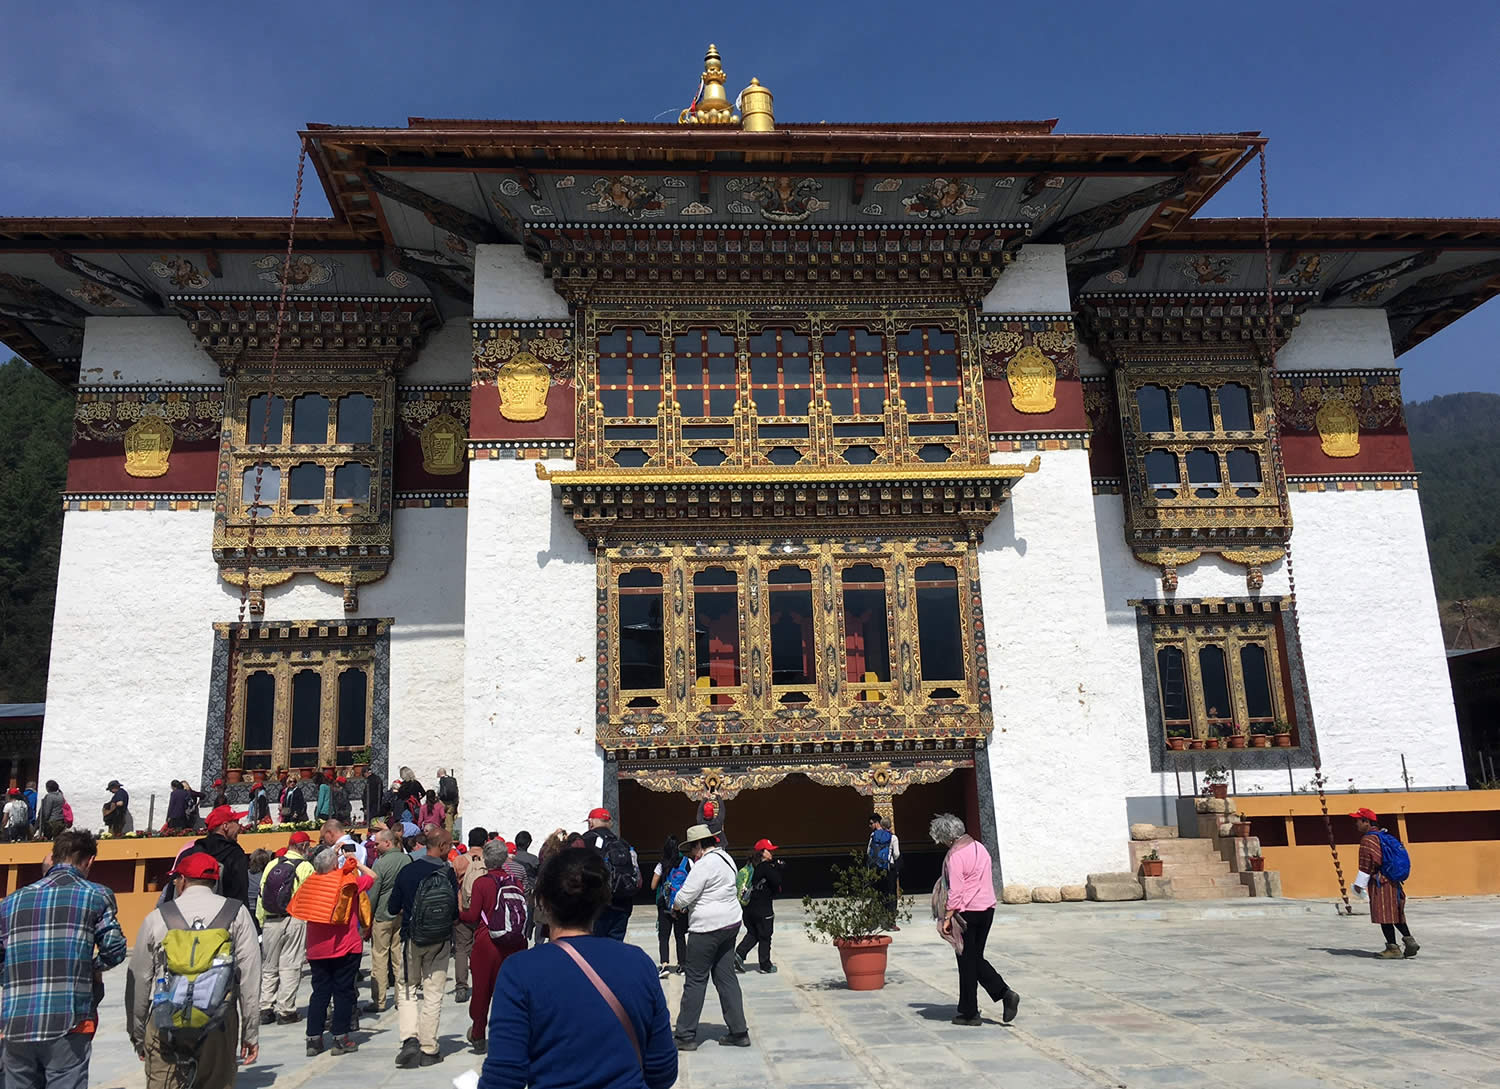 The new Konchogsum Lhakhang currently under construction.